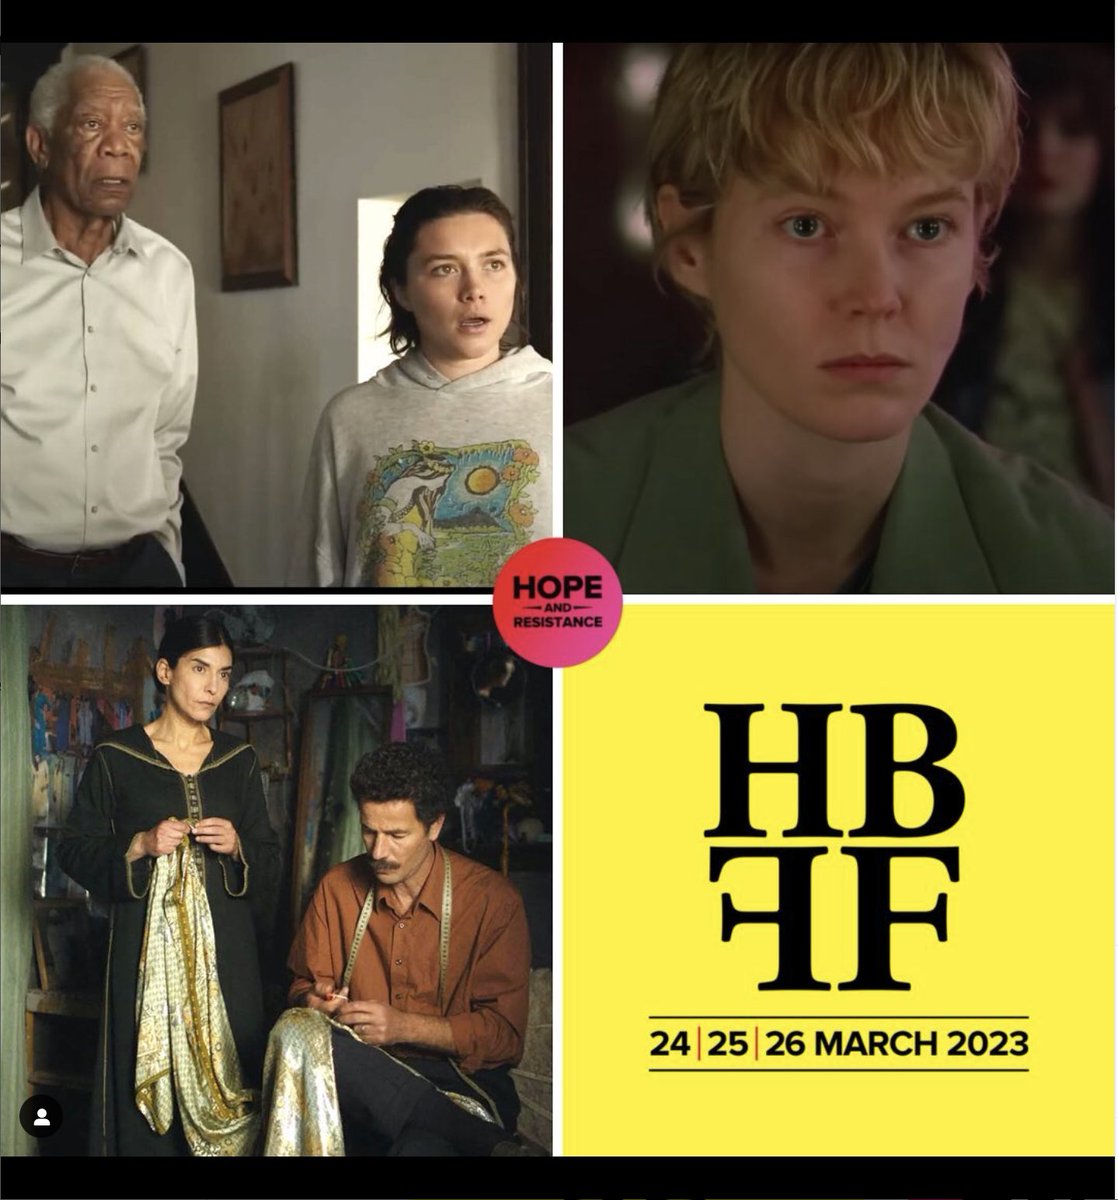 #ChokedUp will have its UK premiere at the @hbfilmfestival !! We are so excited to have our film screened in the short film competition on Sunday 26th March! Love what this festival embodies! So proud! @JMWorzel  @BruProductions @adrianmarciante @MPeakeOfficial #hopeandresistance